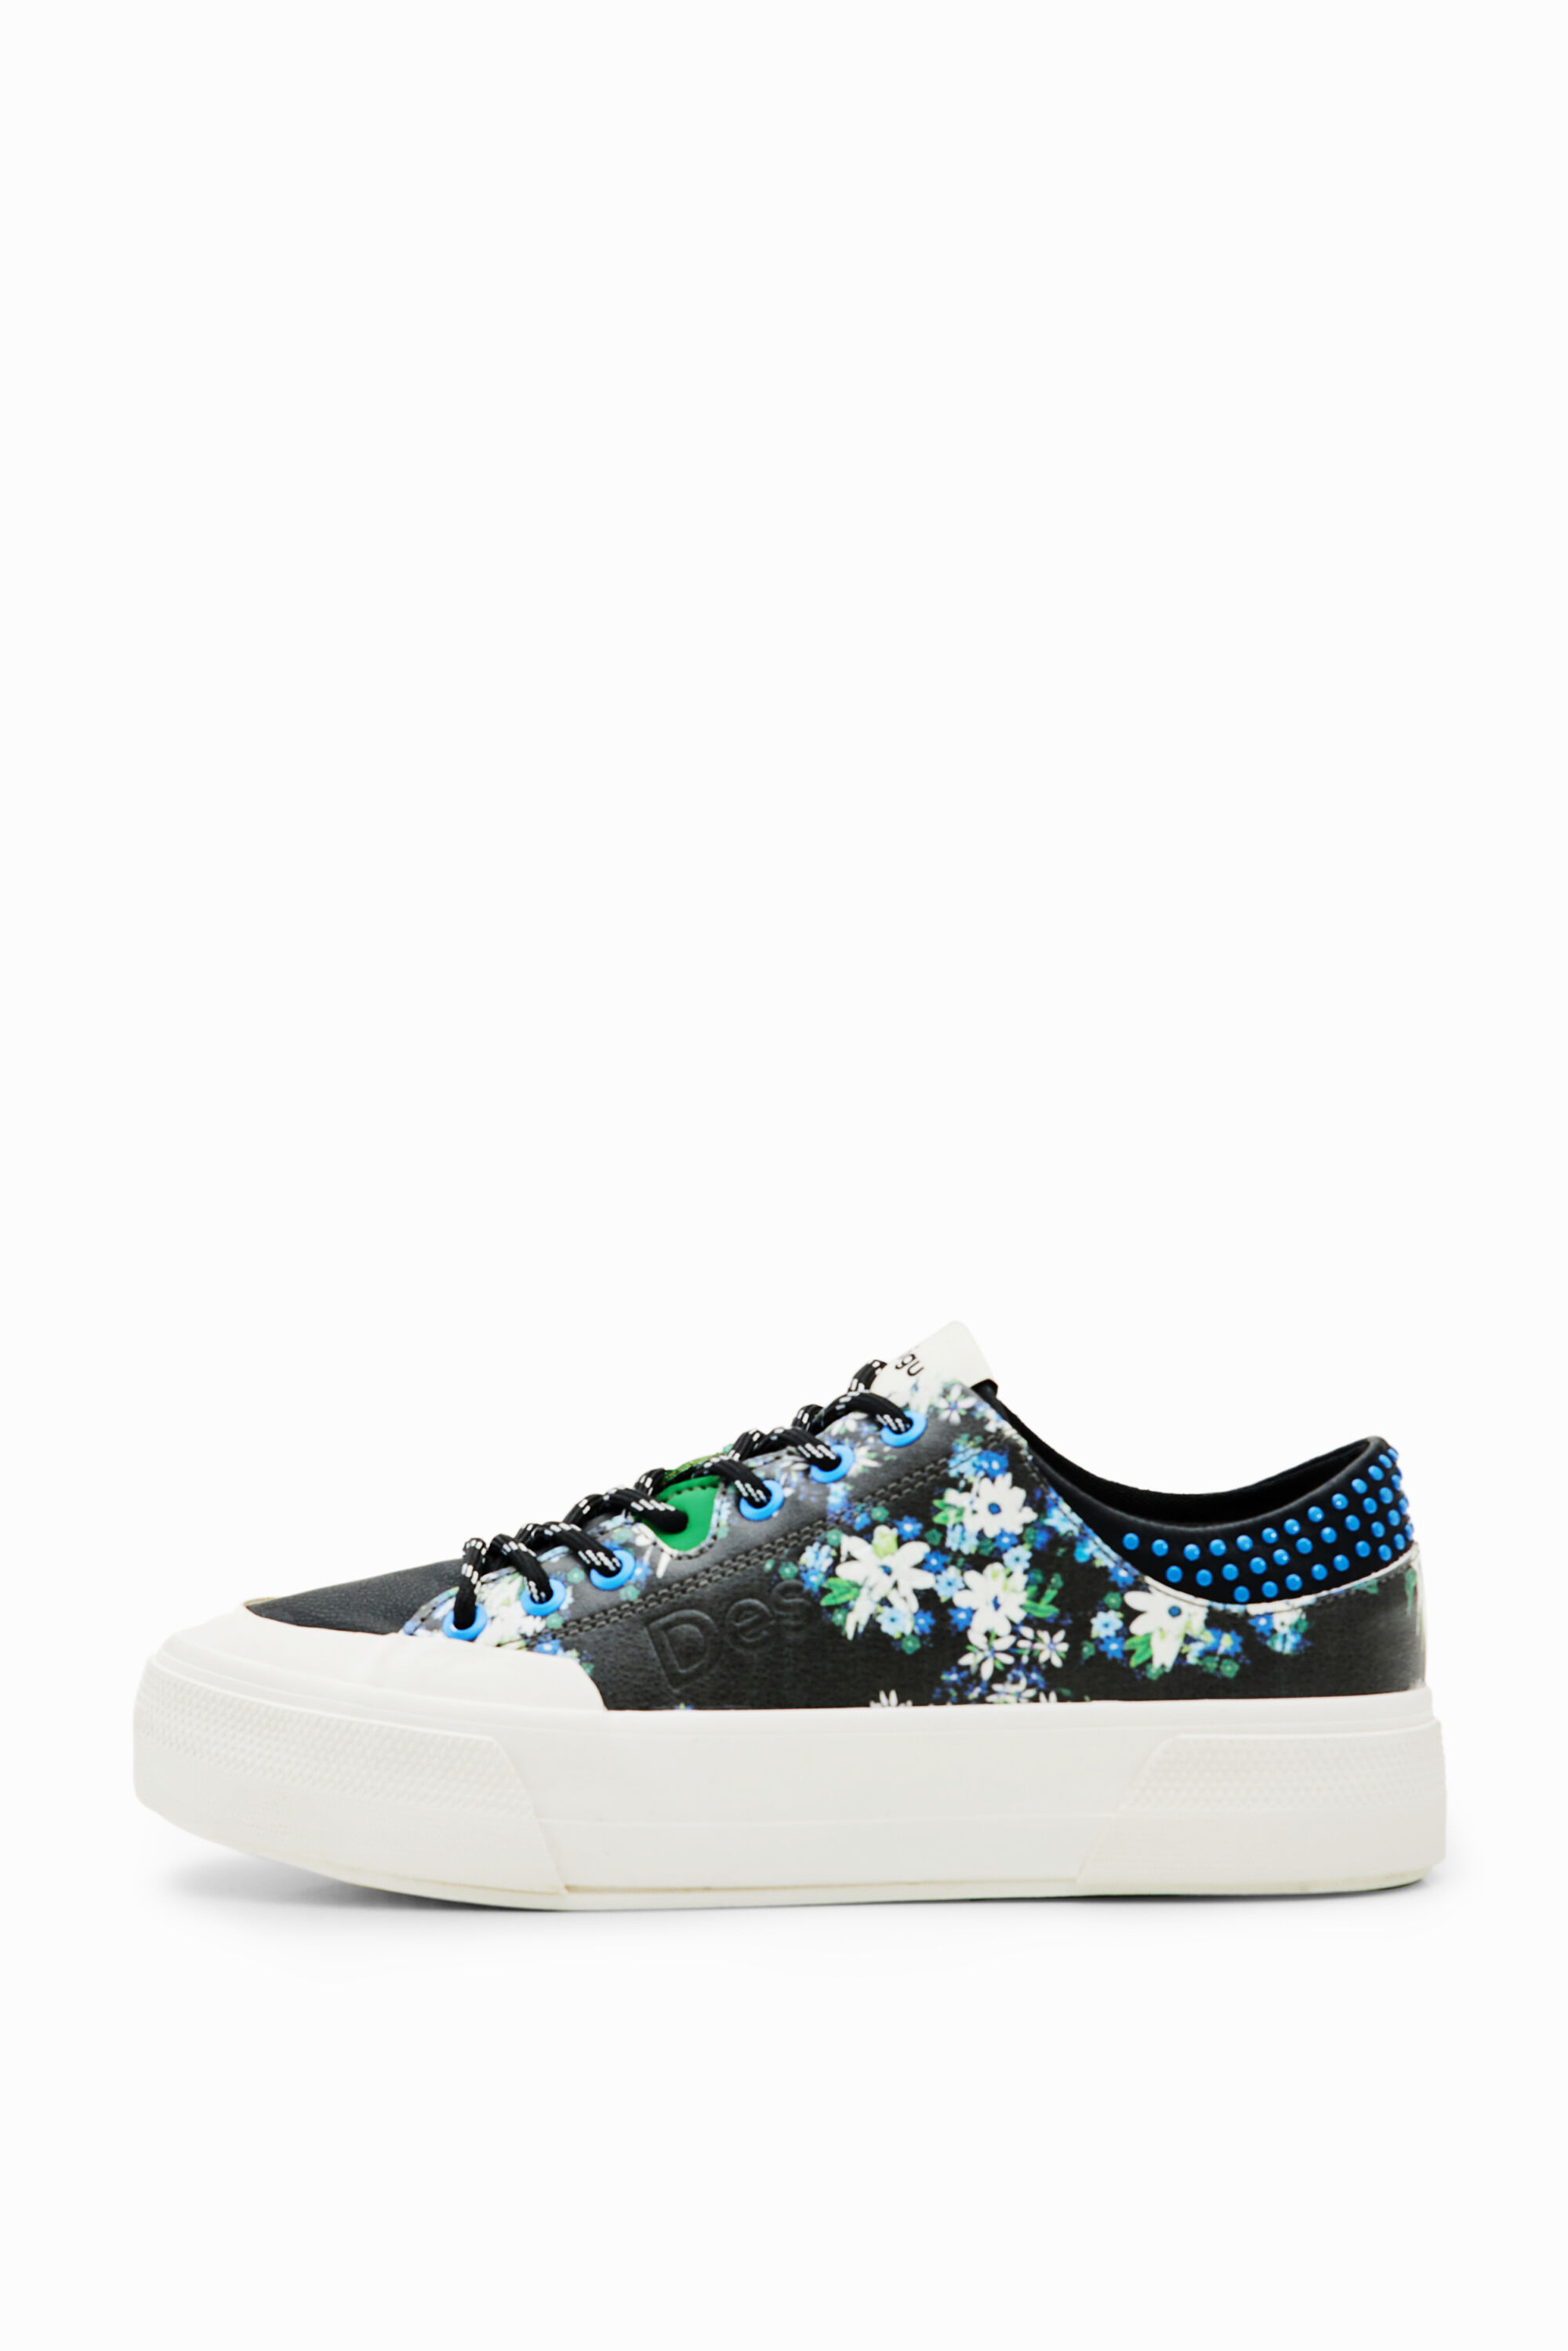 Coach Clip Low Top Sneaker In Signature Canvas With Floral Print 10  congbaohoabinh.gov.vn